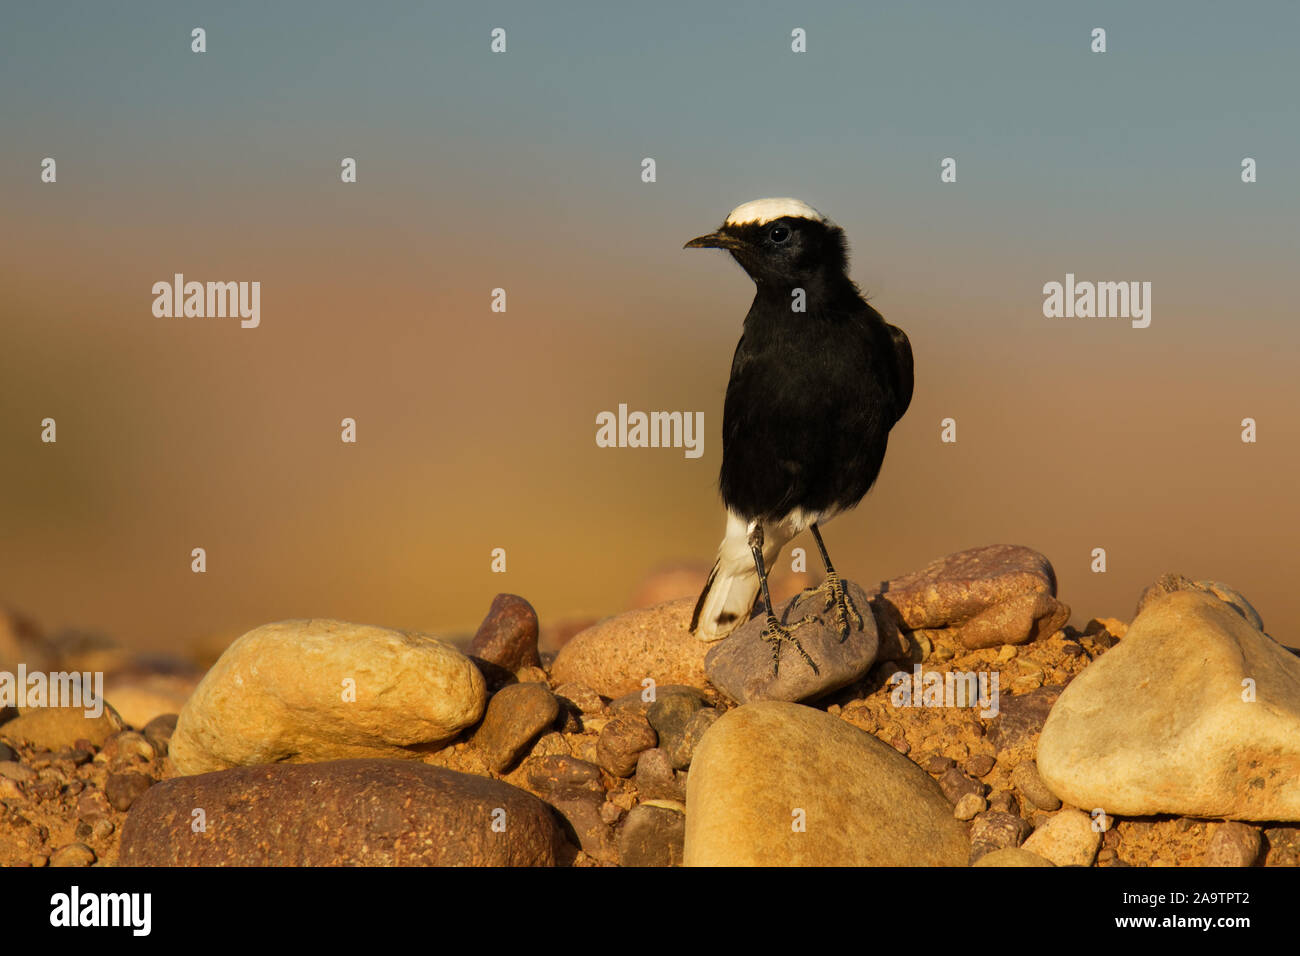 White-crowned wheatear - Oenanthe leucopyga black and white bird breeds in stony deserts from the Sahara and Arabia across to Iraq, largely resident, Stock Photo